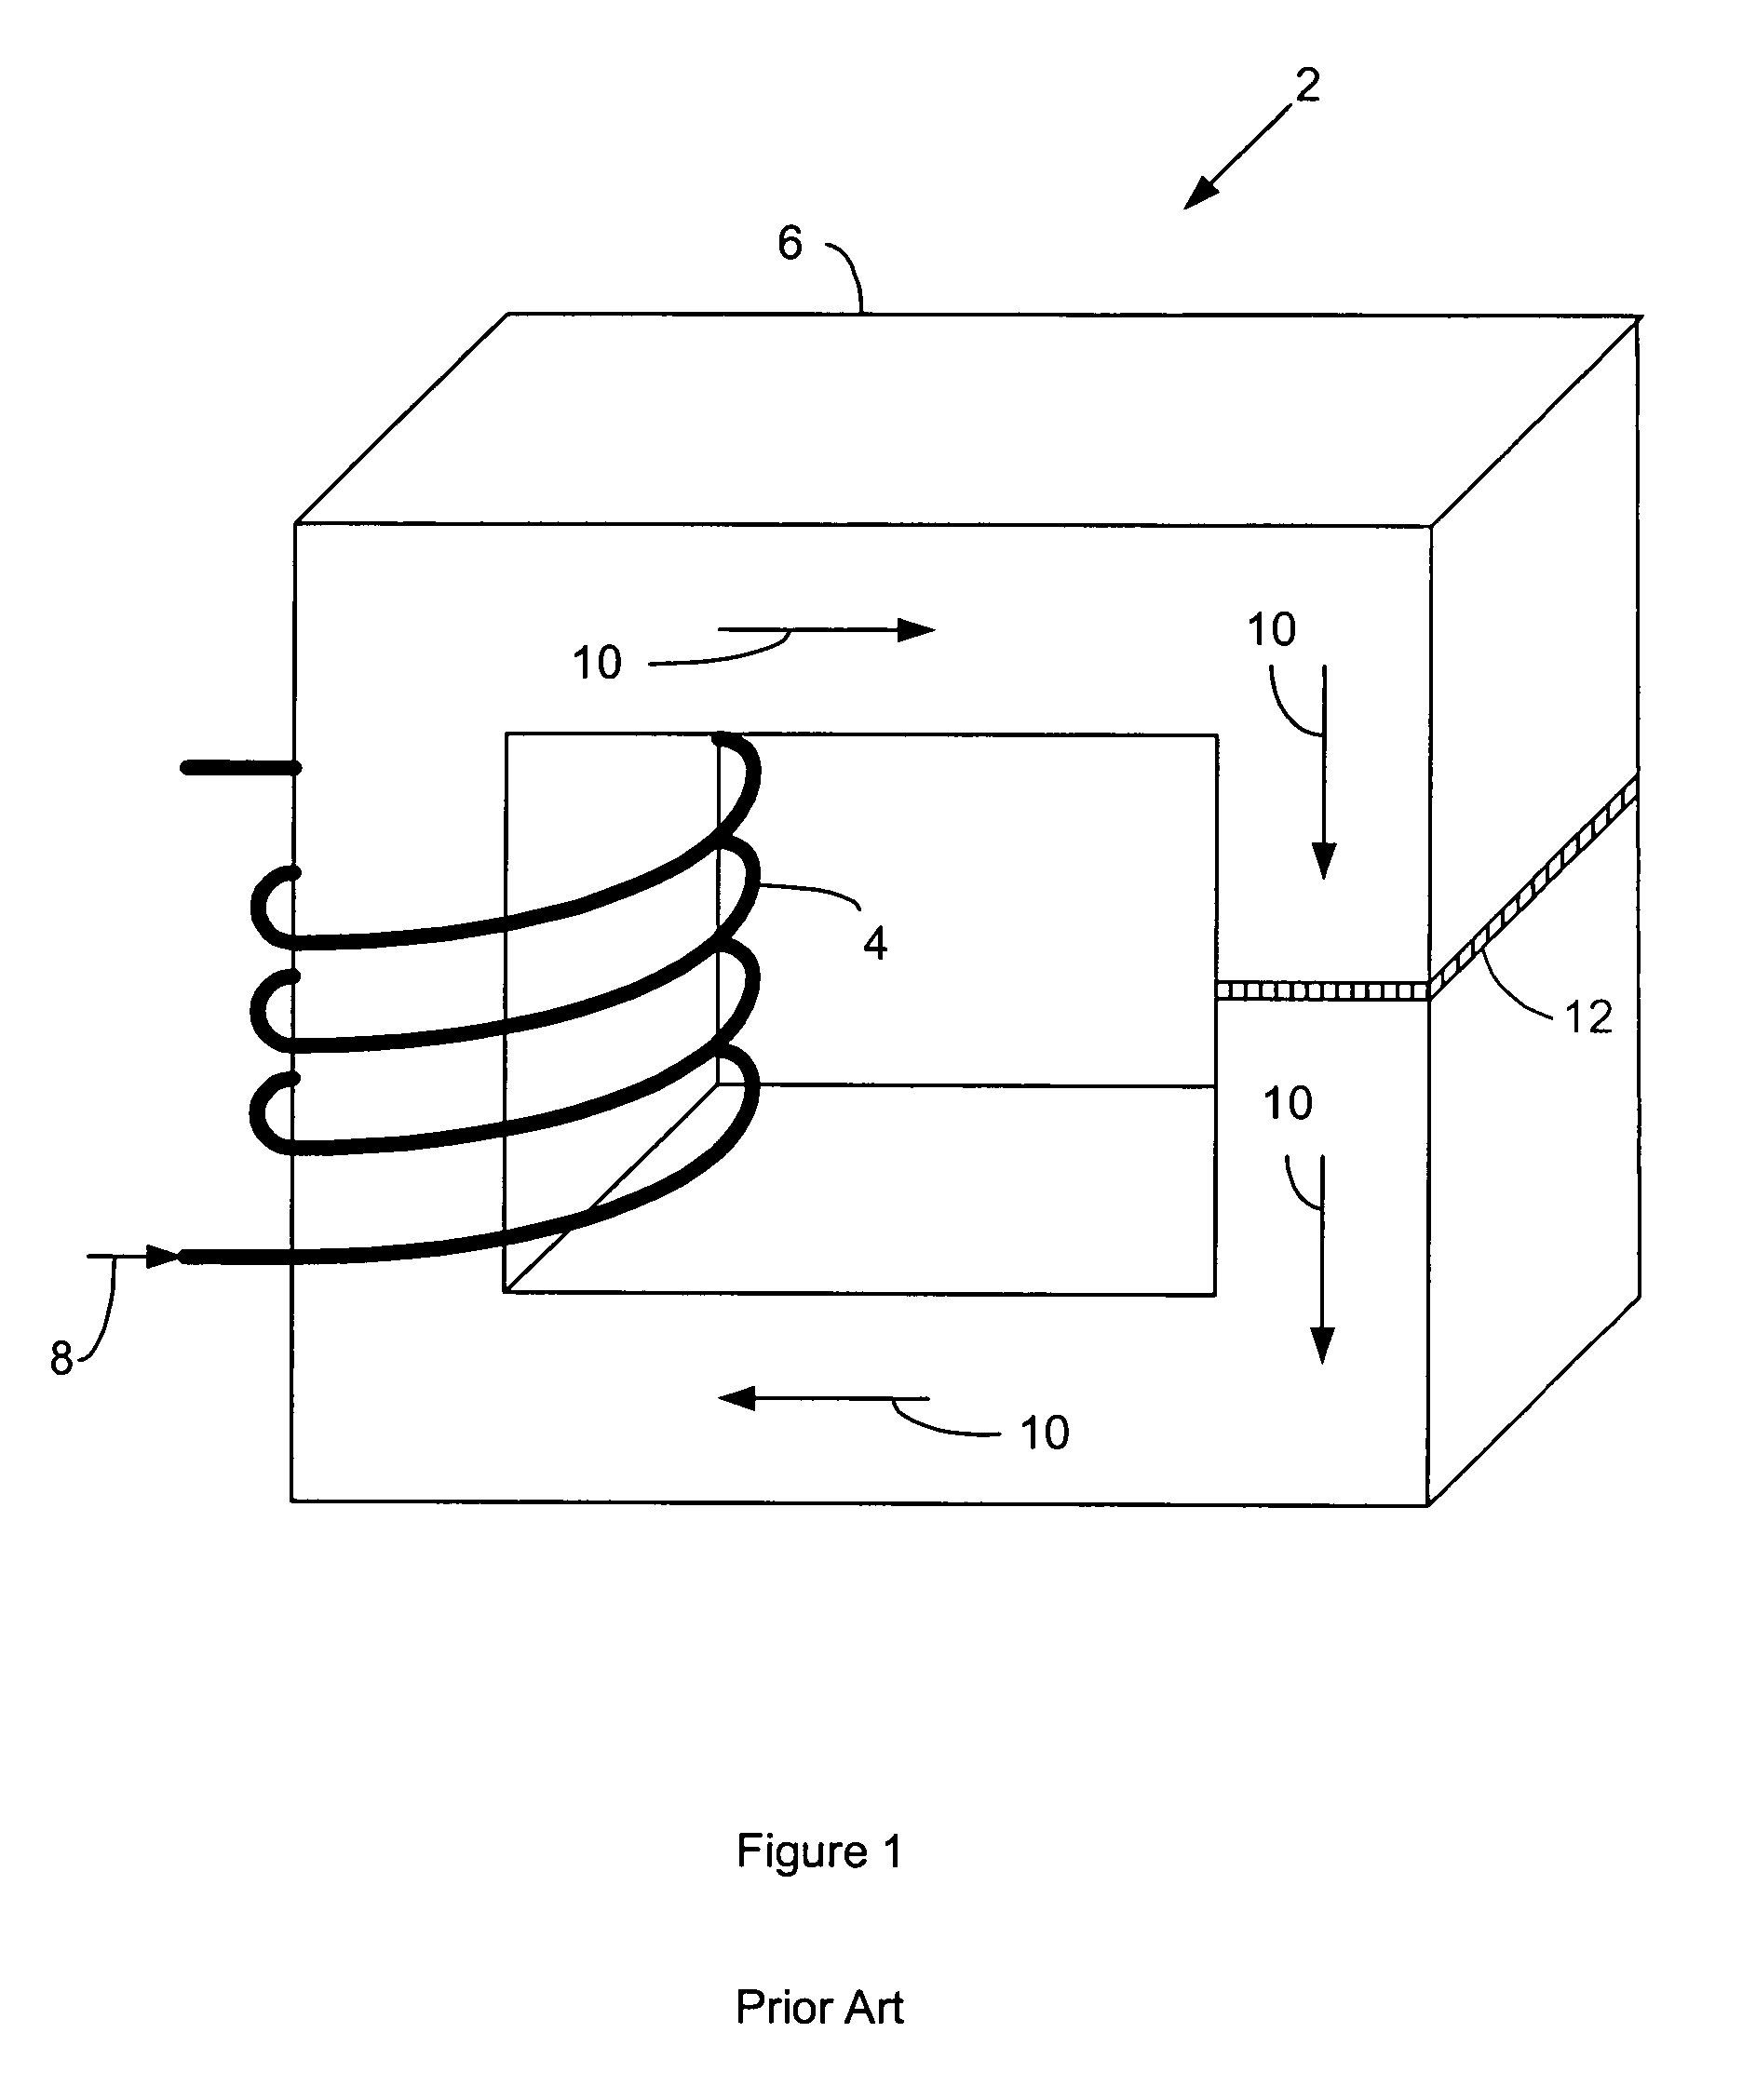 Direct current link inductor for power source filtration